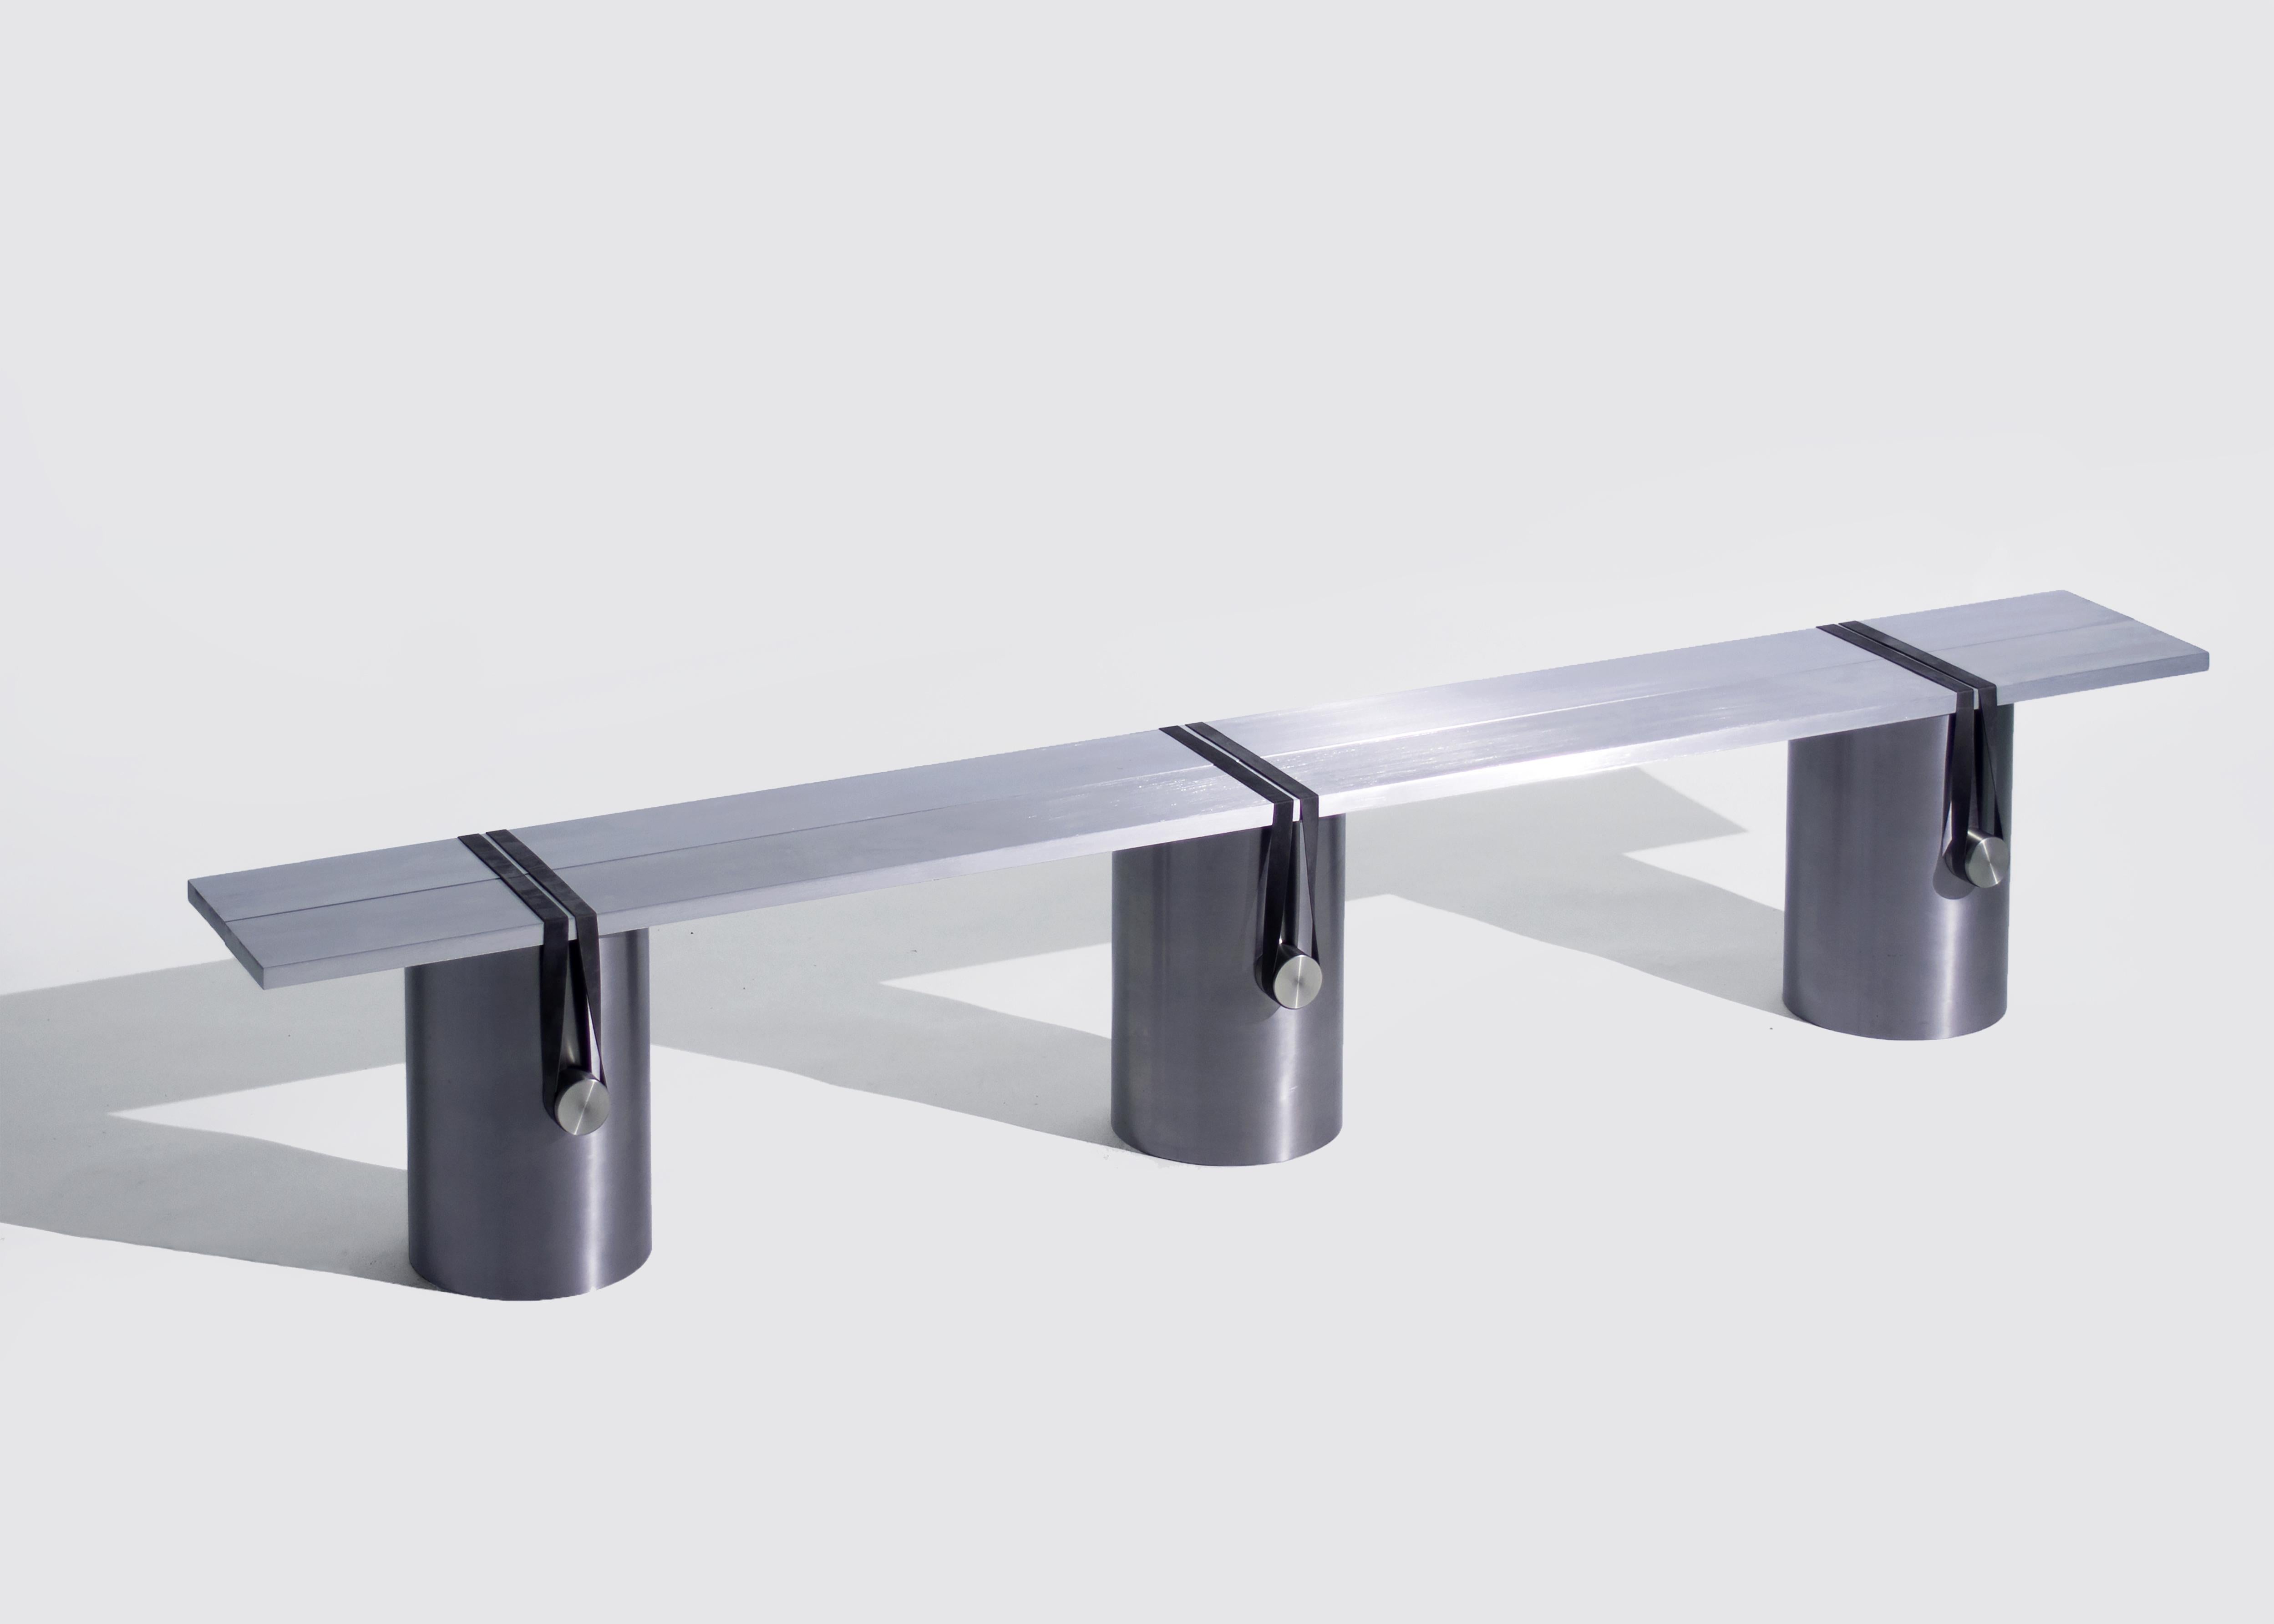 Anodised contemporary bench by Johan Viladrich
Material: Anodised Aluminum, Rubber
Measures: L200 x W24 x H38 cm
Approx. 60kg
Limited Edition for Jonathan


Johan Viladrich is an internationally famous contemporary designer.
A pure design with